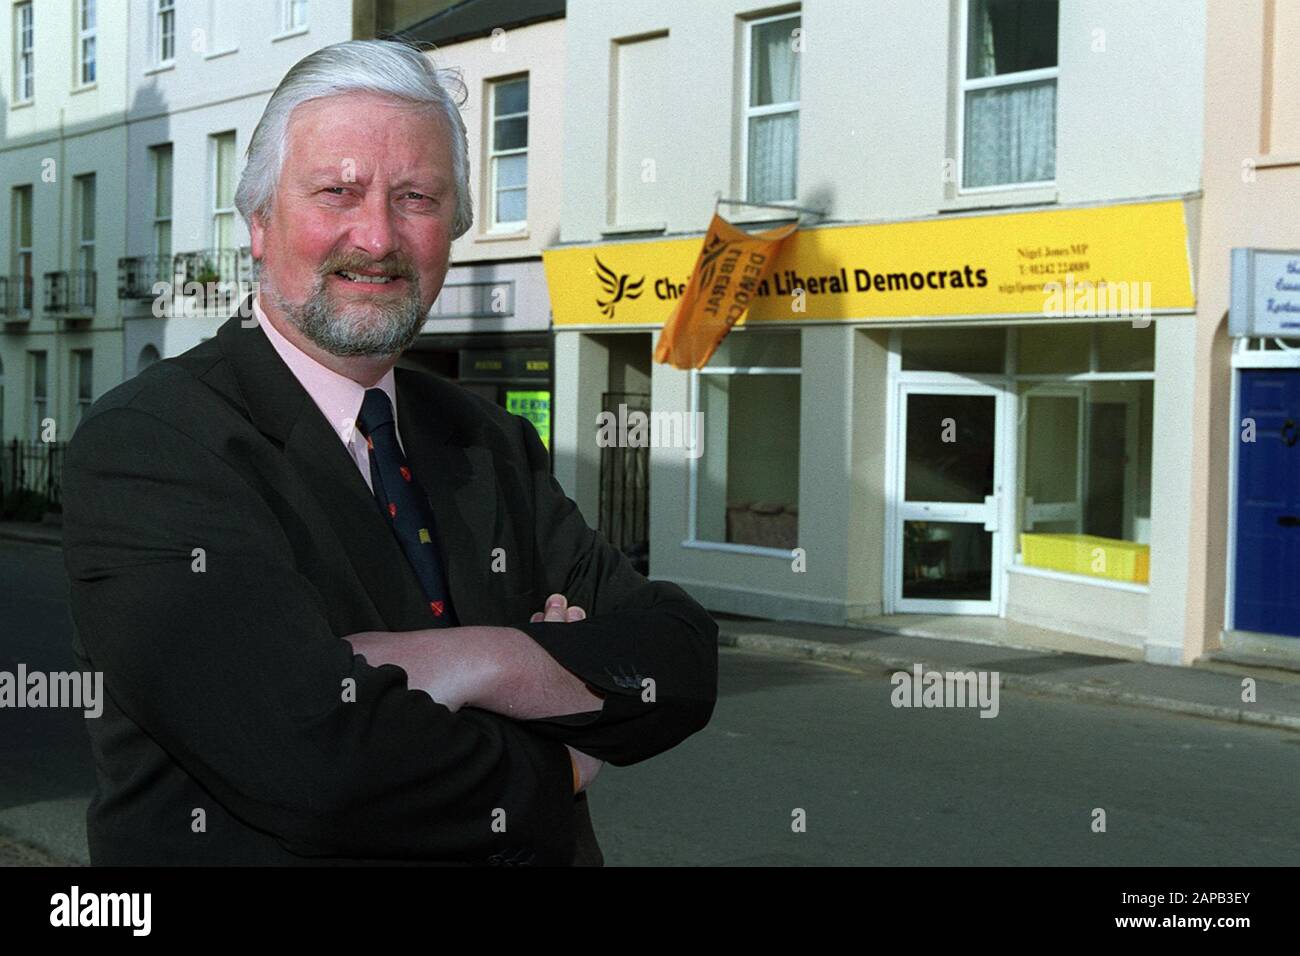 Archive of Nigel Jones MP, Now Lord Jones of Cheltenham, with his wife Katherine, outside the new Cheltenham Liberal Democrats office in Cheltenham on 10th April 2000, only months after he was attacked by Robert Ashman with a samuri sword -   On 28 January 2000, Robert Ashman entered Jones's constituency office and attacked him and his assistant, local councillor Andrew Pennington, with a katana. As a result of the attack, Pennington was killed and Jones was severely injured.[3] Jones required 57 stitches to close wounds to his hand from the assault.[4]  Jones had written a character reference Stock Photo